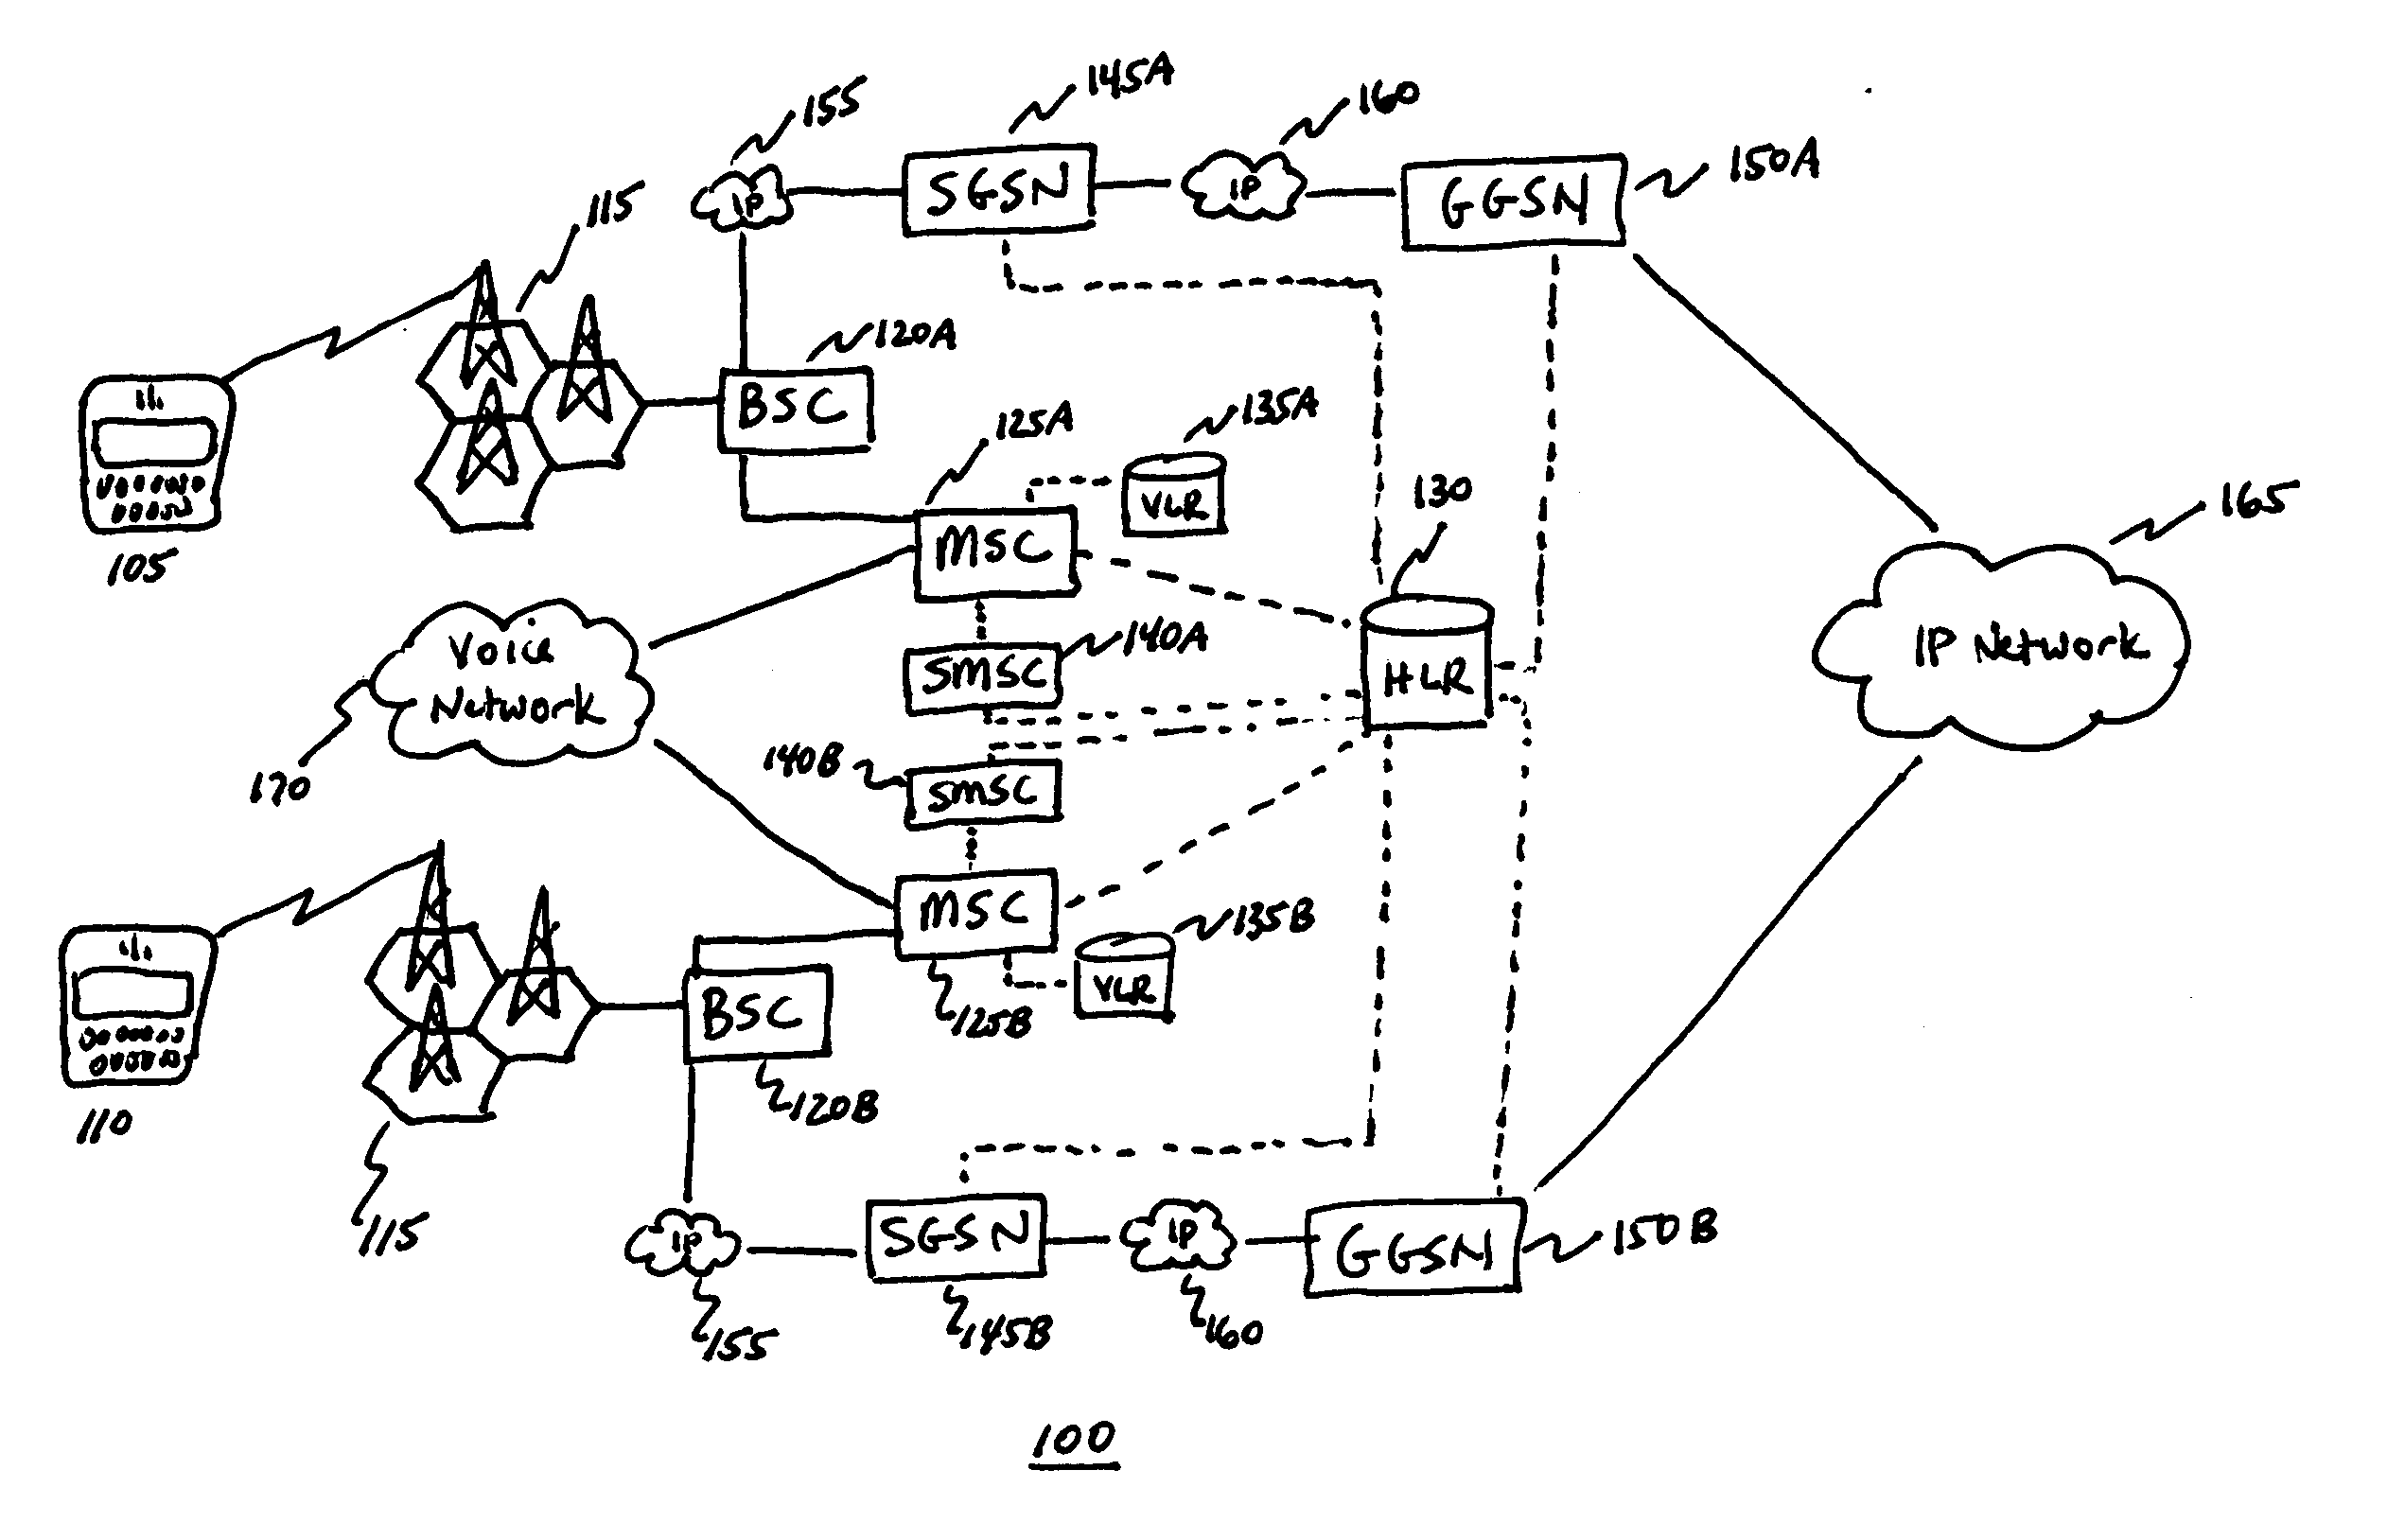 Peer-to-peer mobile instant messaging method and device